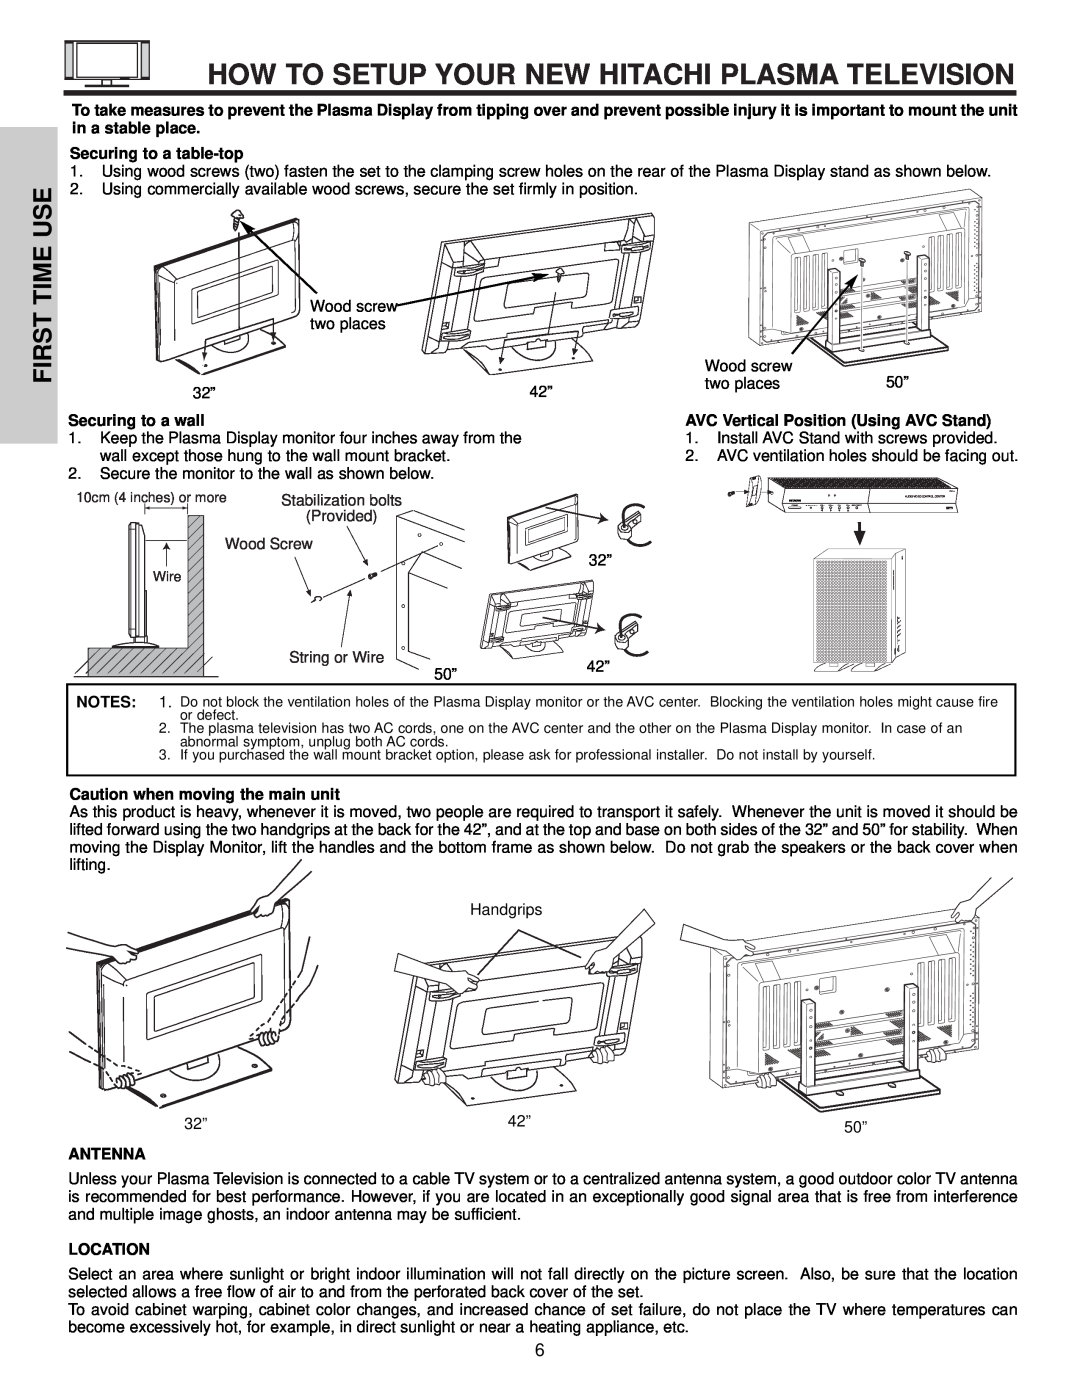 Hitachi 32HDX60 How To Setup Your New Hitachi Plasma Television, Time Use, First, Securing to a table-top, Antenna 